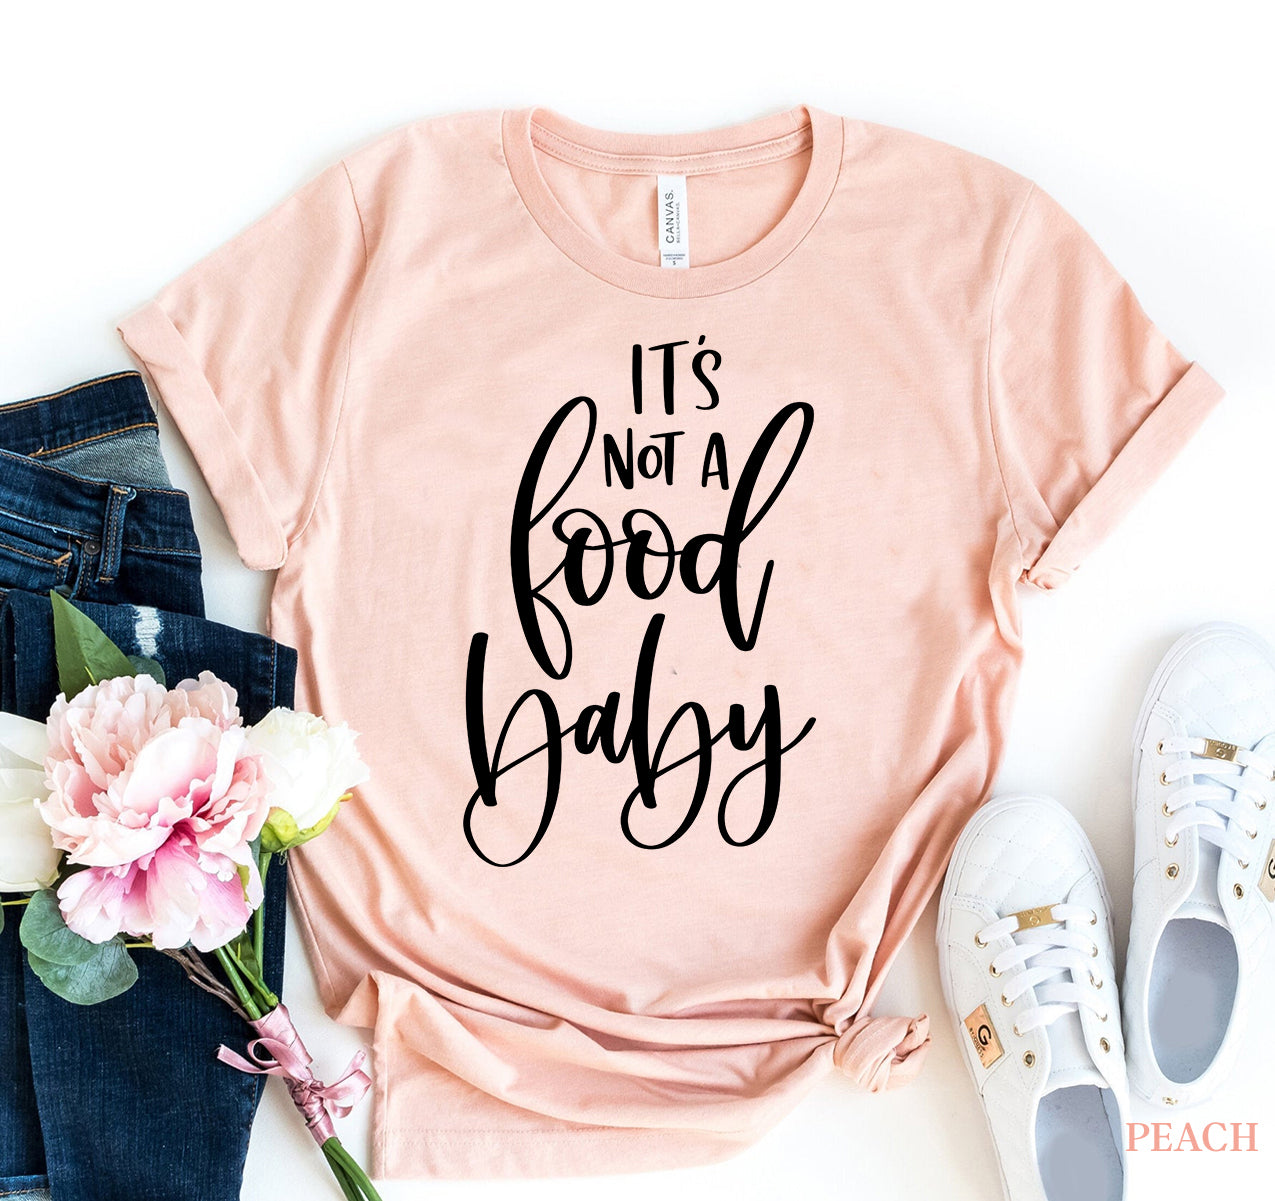 It's Not A Food Baby Shirt, Maternity Shirt